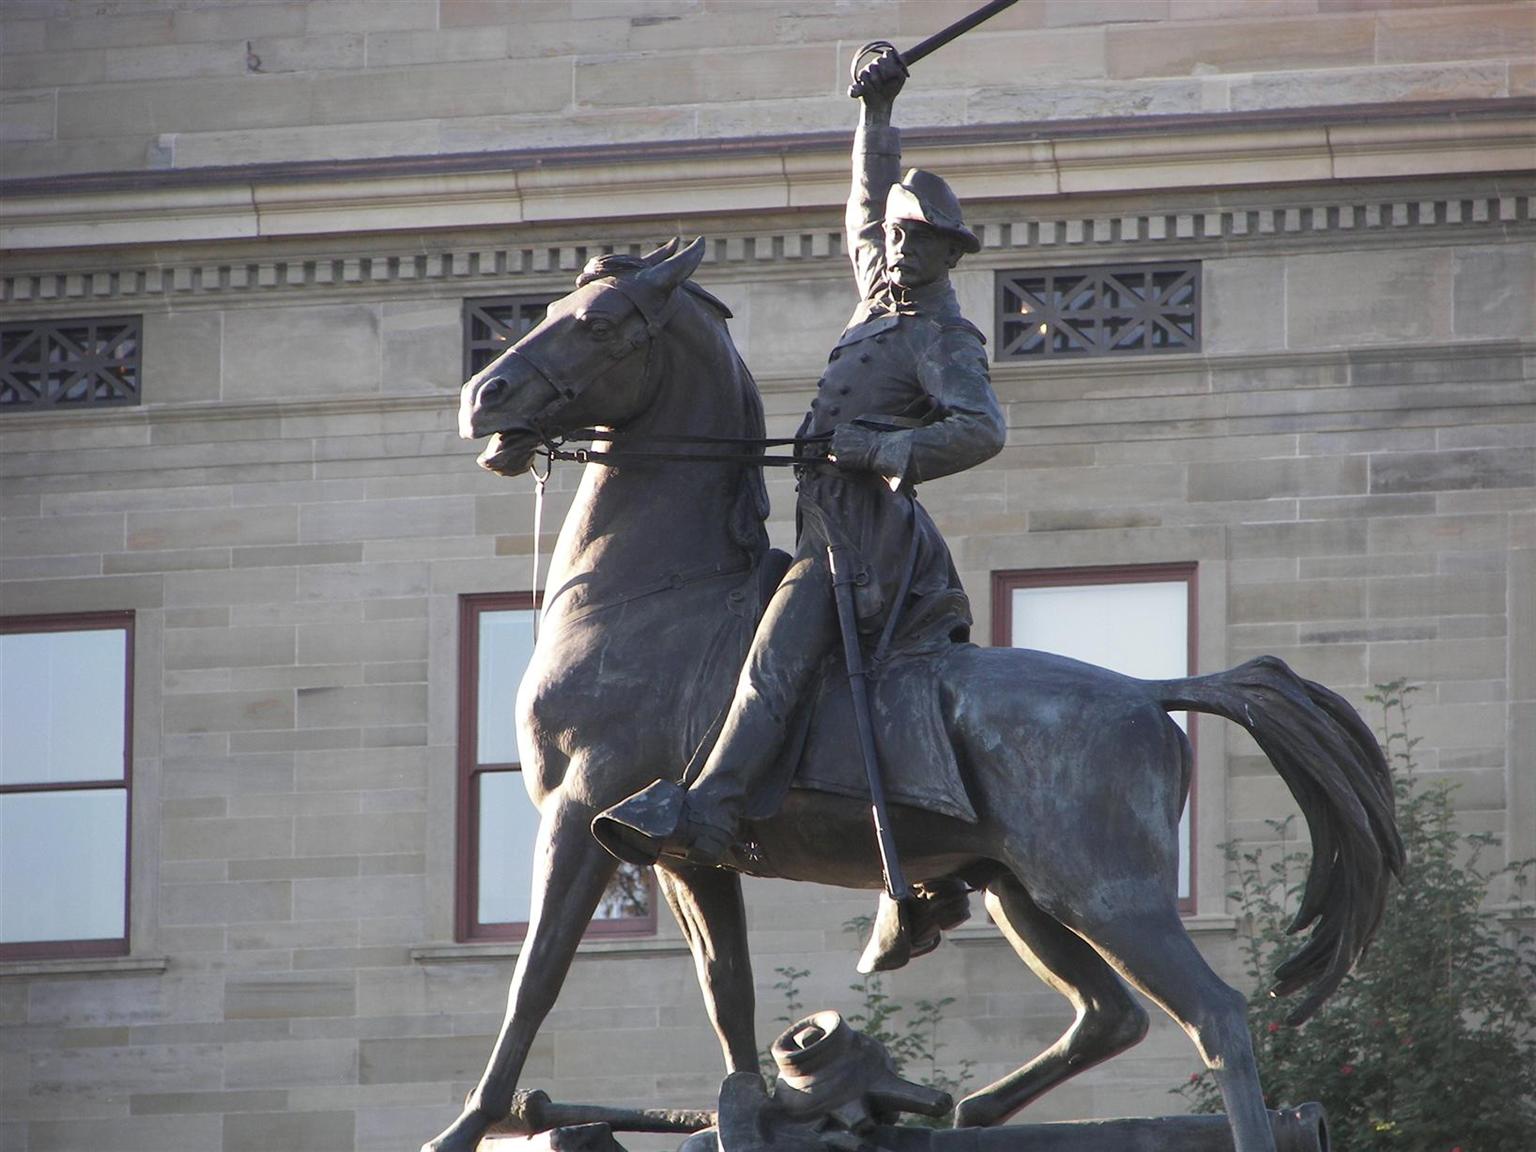 Statue at State Capitol in Helena, Montana